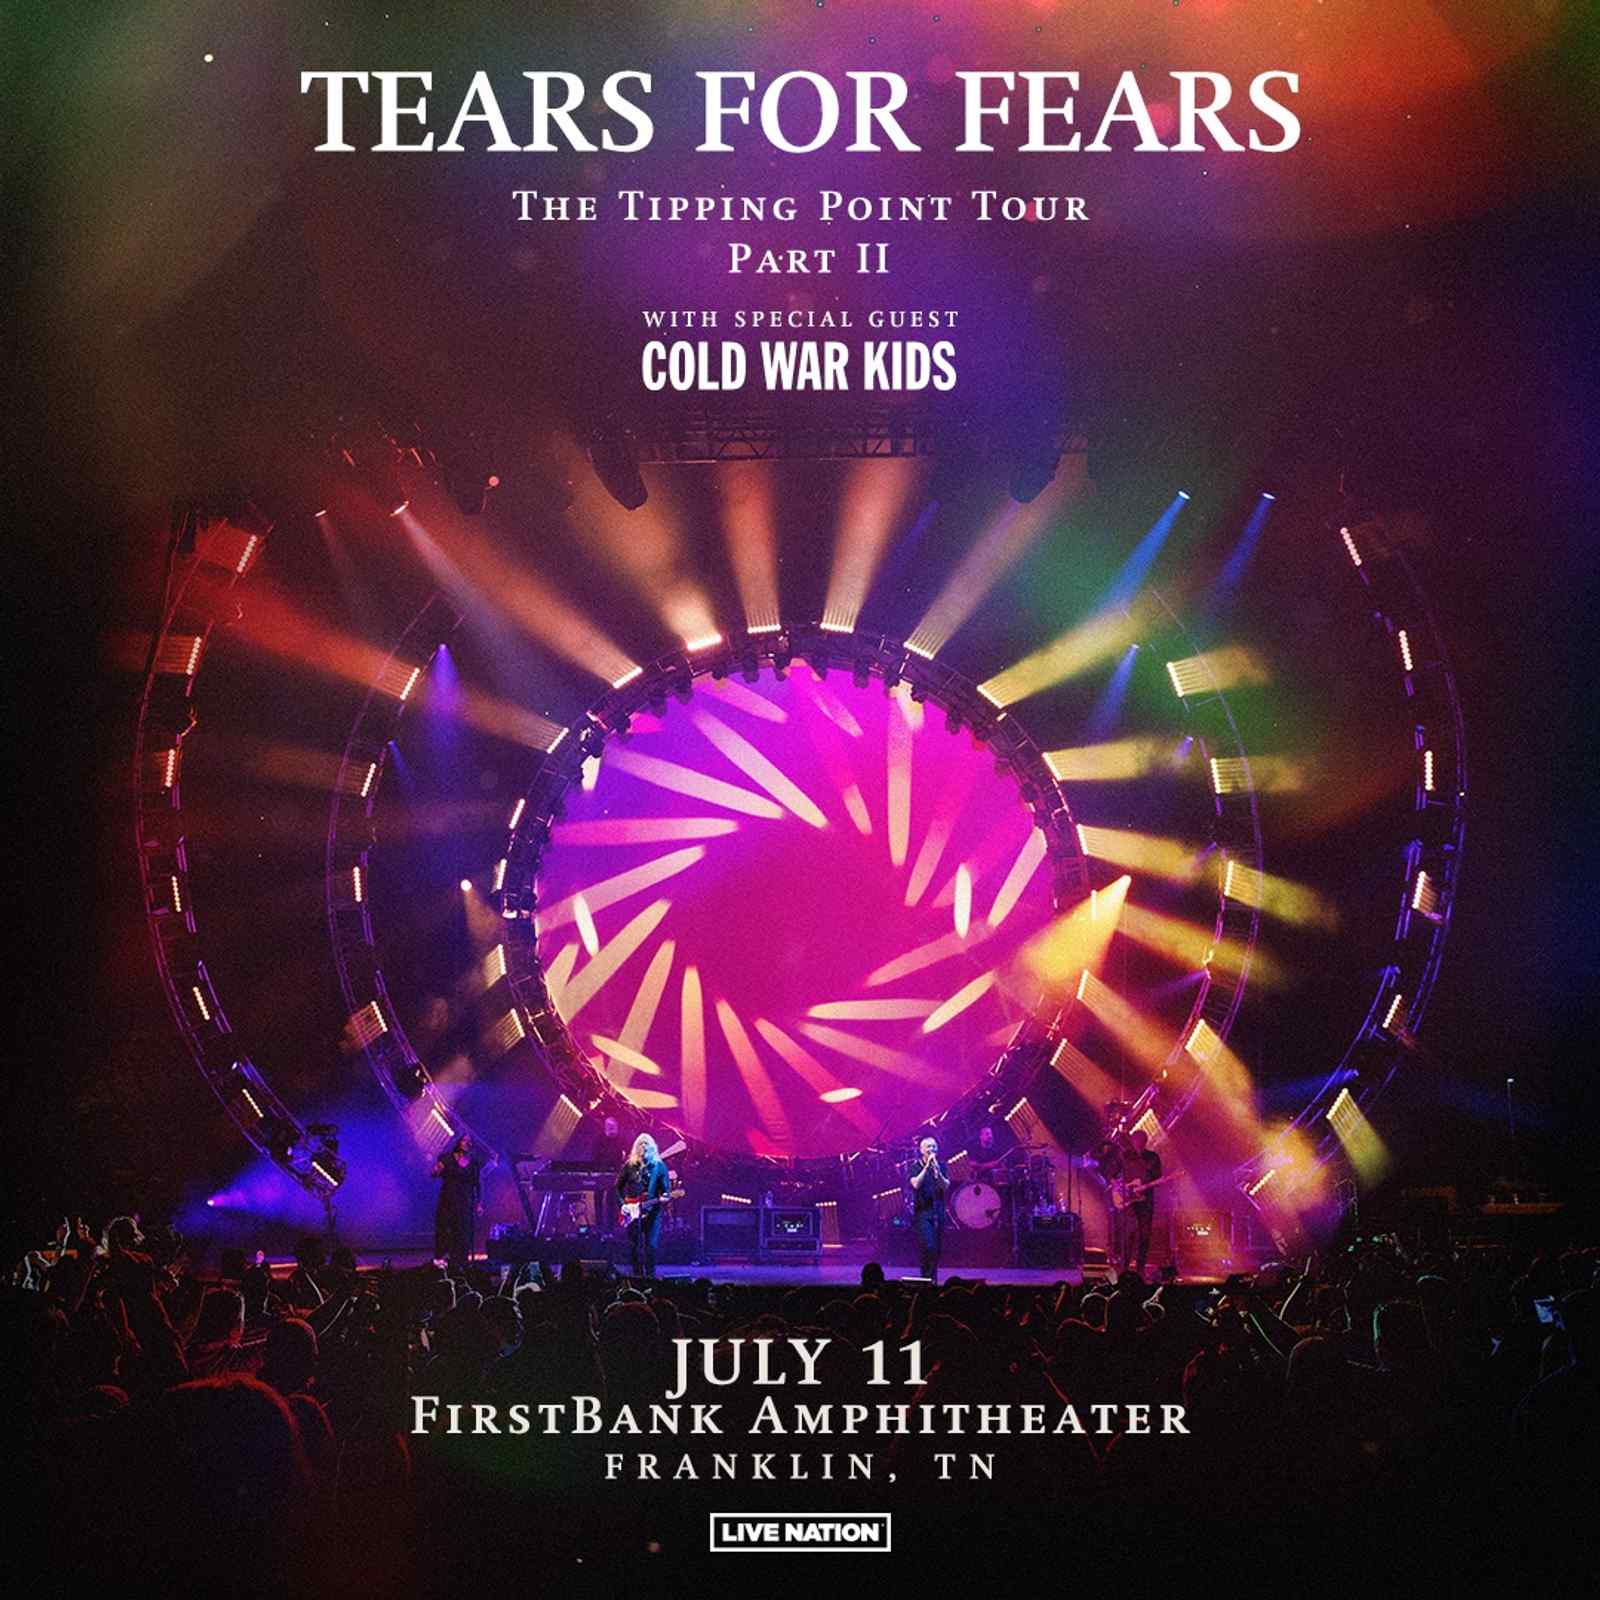 Tears For Fears The Tipping Point Tour Part II with special guests Cold War Kids Franklin, Tenn.